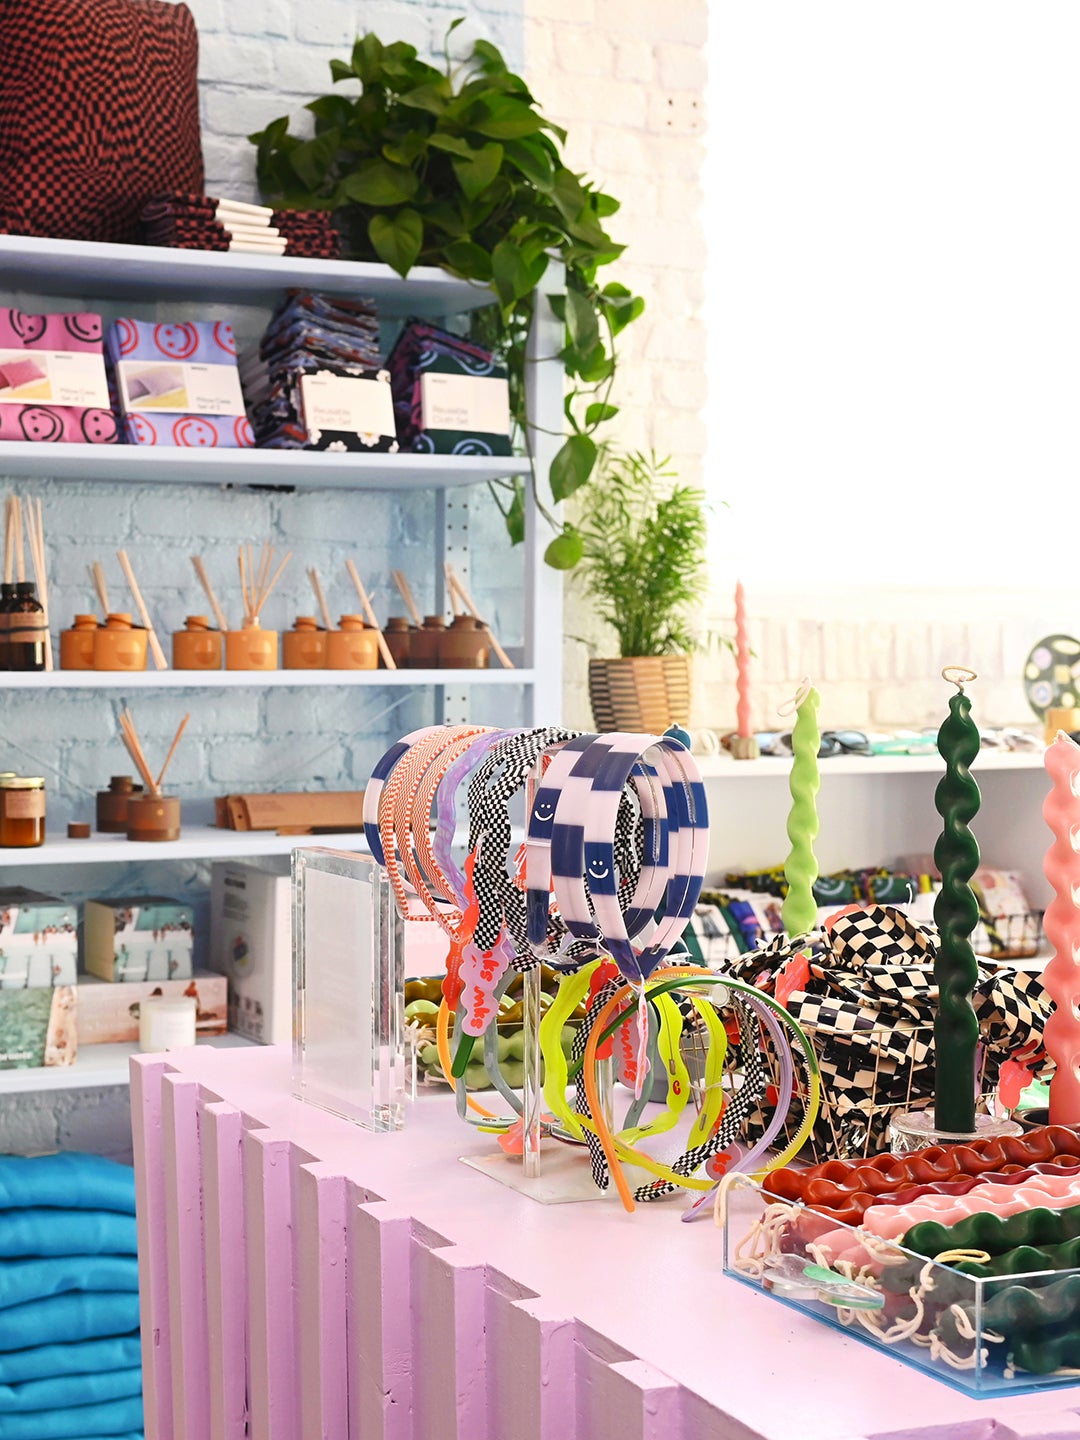 Shop with pink table and headbands on display